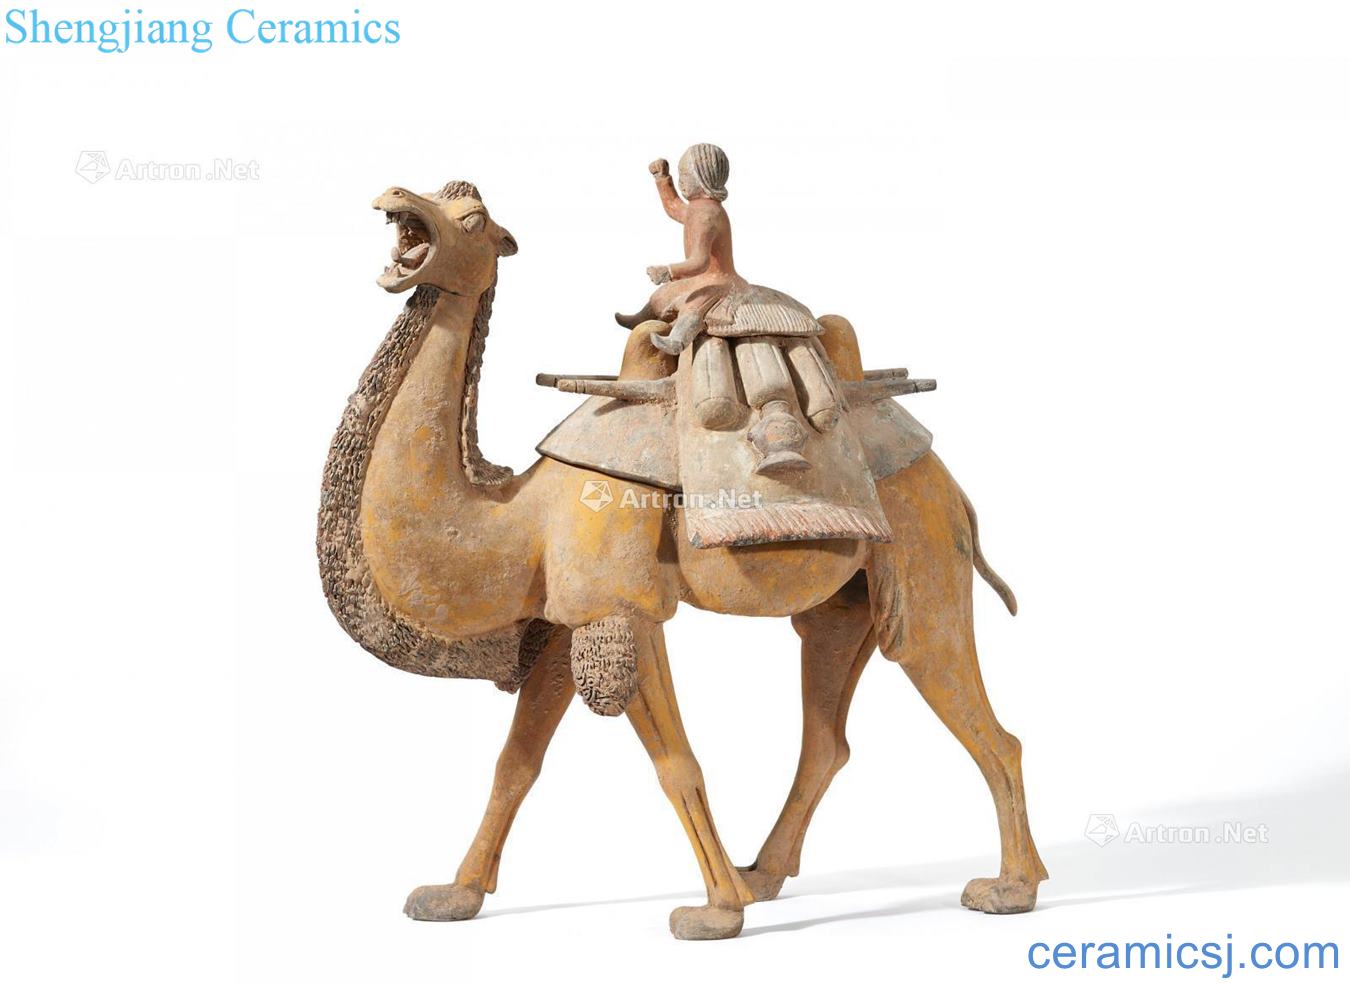 The early 7th century late tang The western people ride a camel terracotta figures